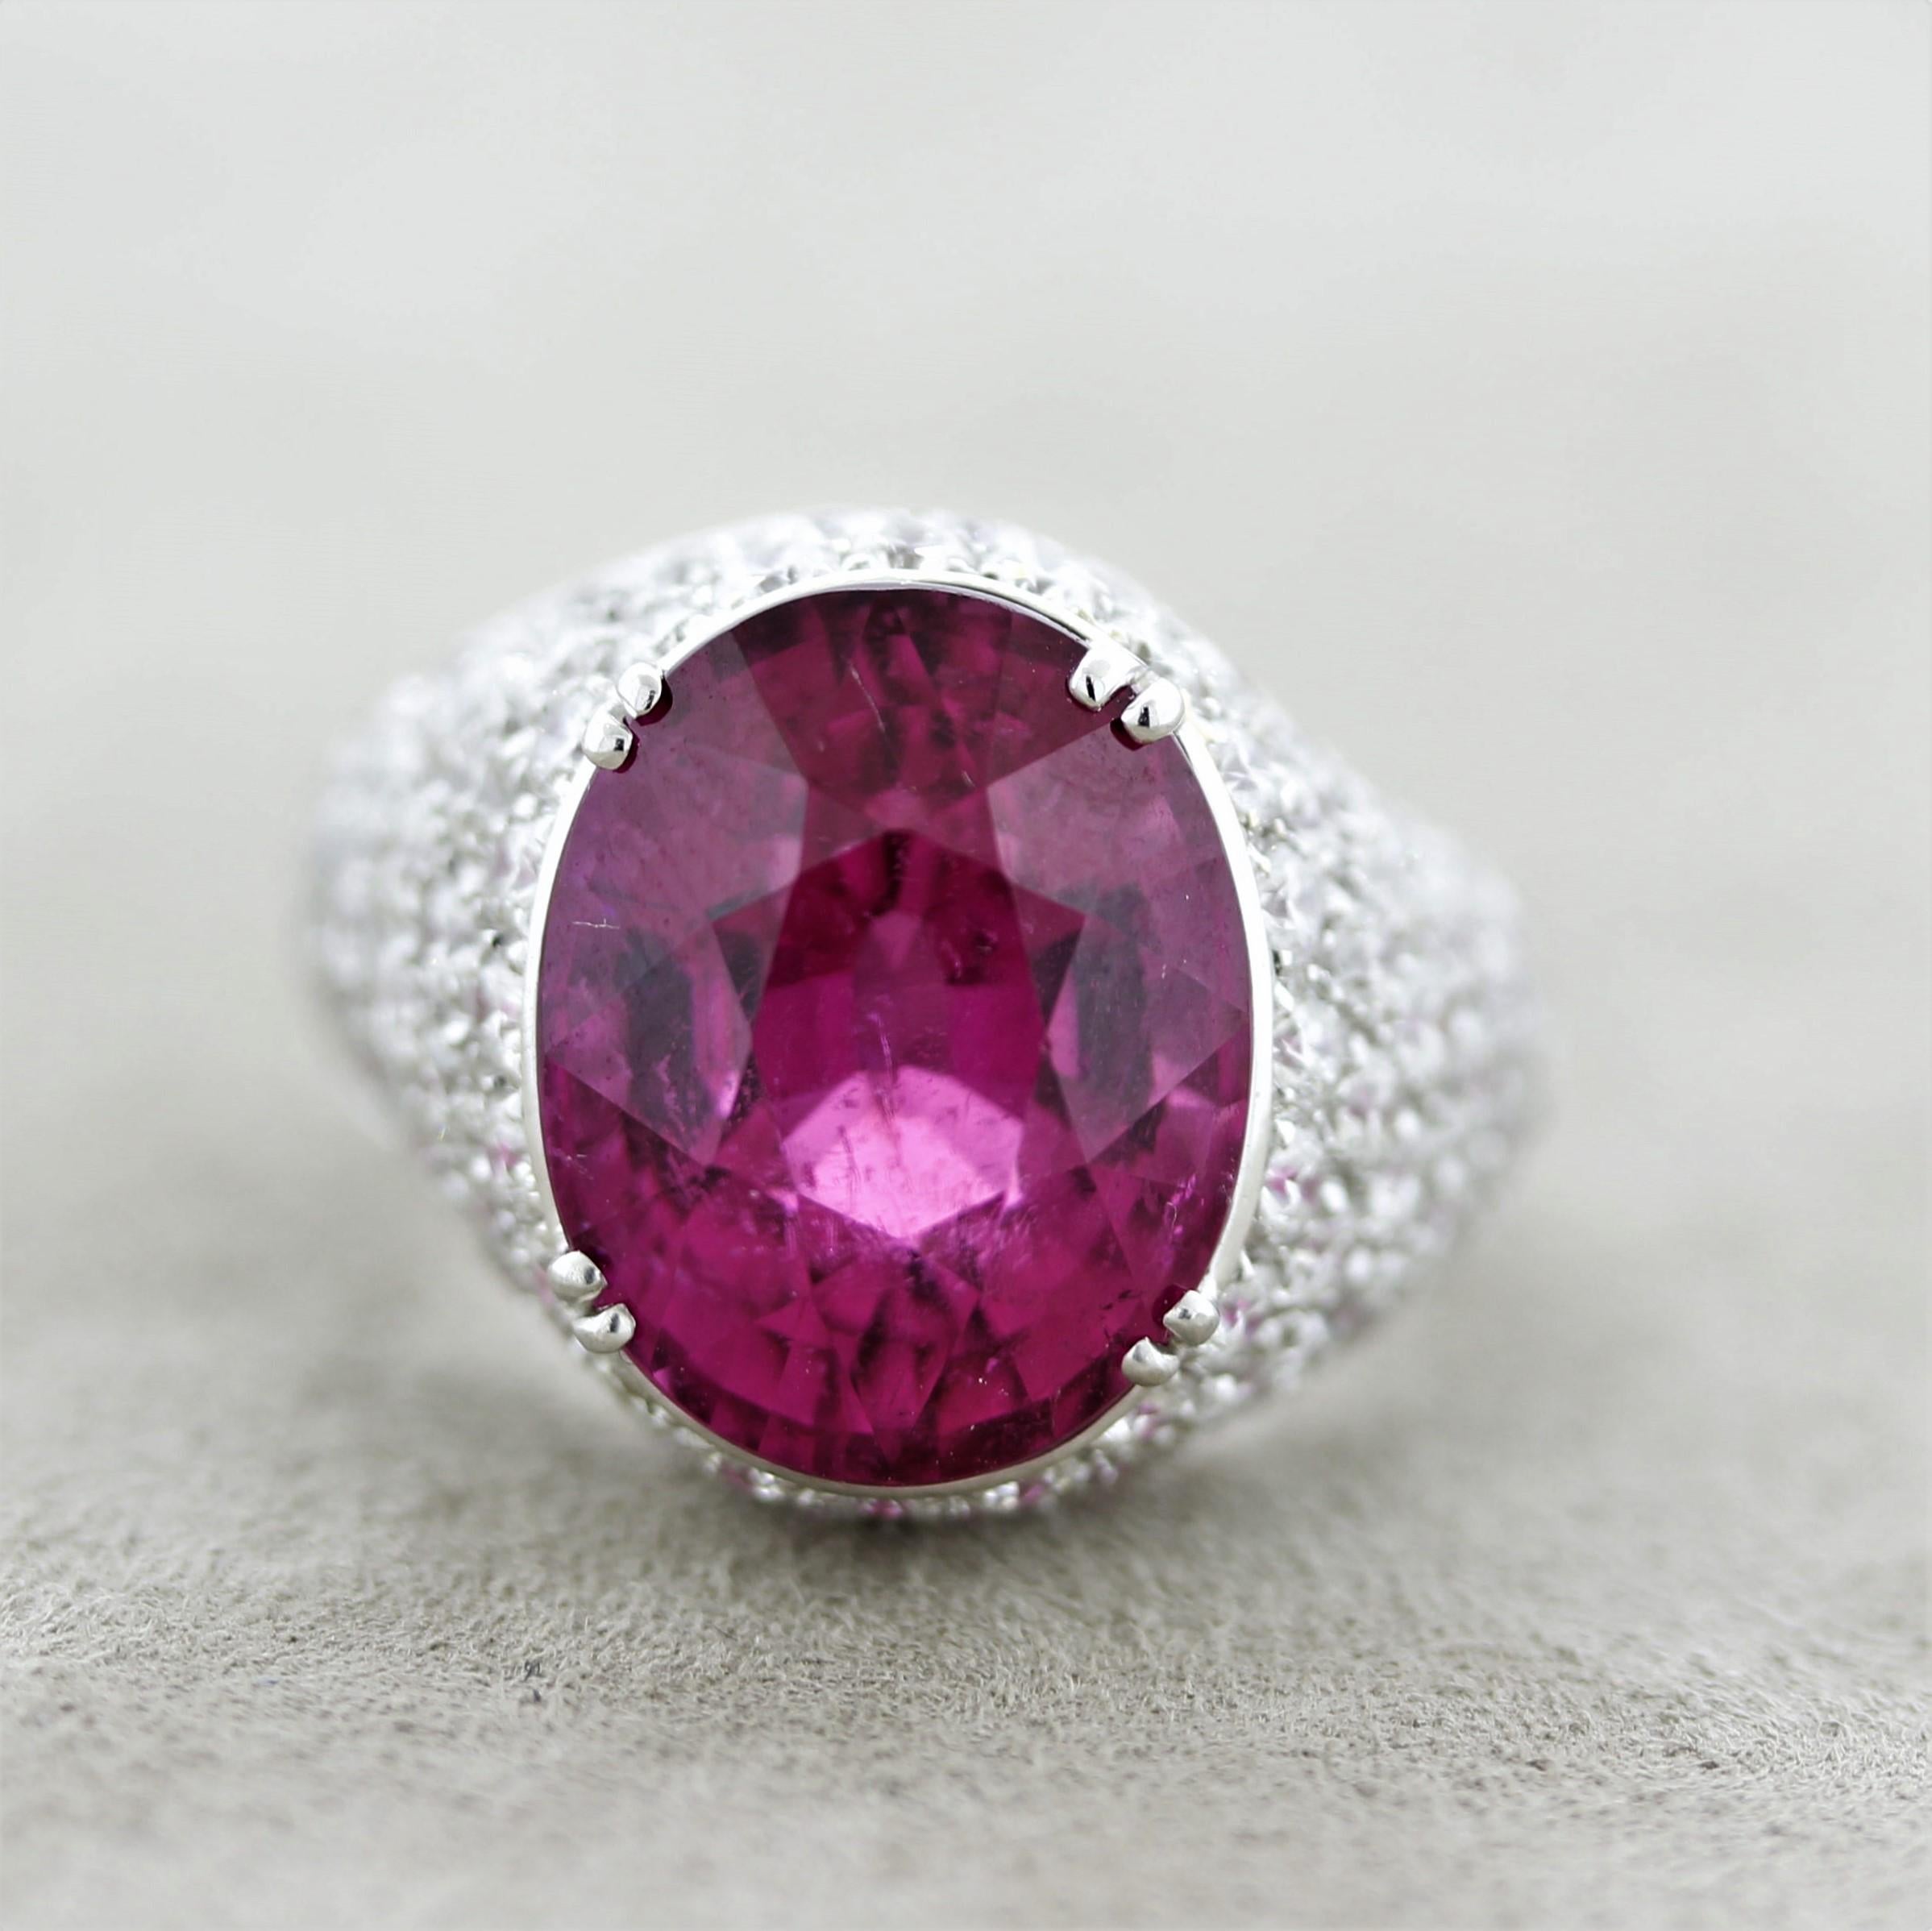 Simply amazing. This ring features a superb gem tourmaline with a bright and vivid red-pink color. It weighs 12 carats and has excellent brilliance and light return as the stone is eye-clean free of inclusions. A true rarity. It is accented by 3.45